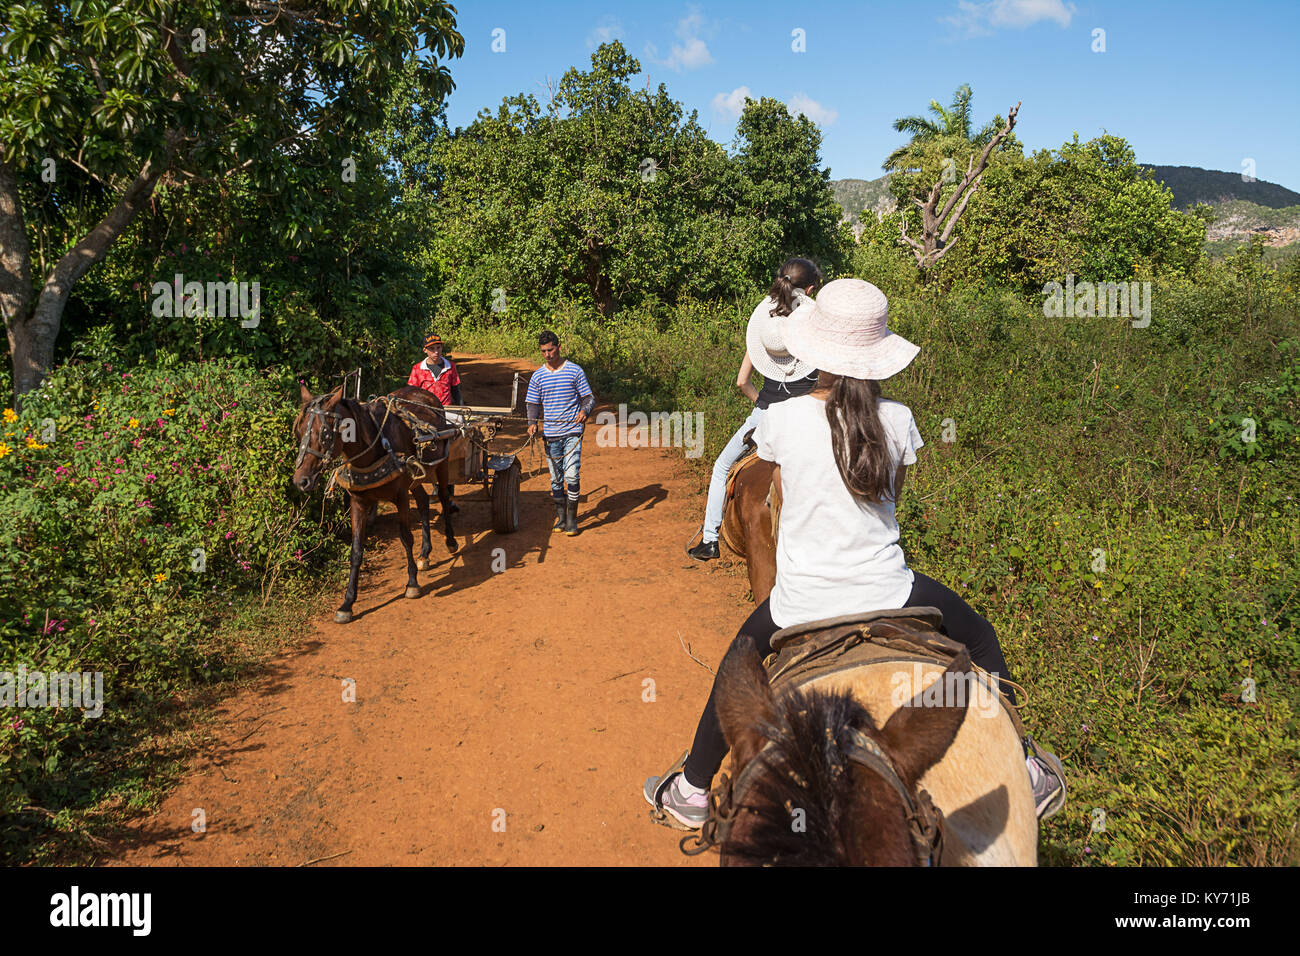 Vinales, Cuba - december 5, 2017: Cohabitation between tourists on horseback and Cubans with the wagon in the valley of Vinales (Cuba) Stock Photo